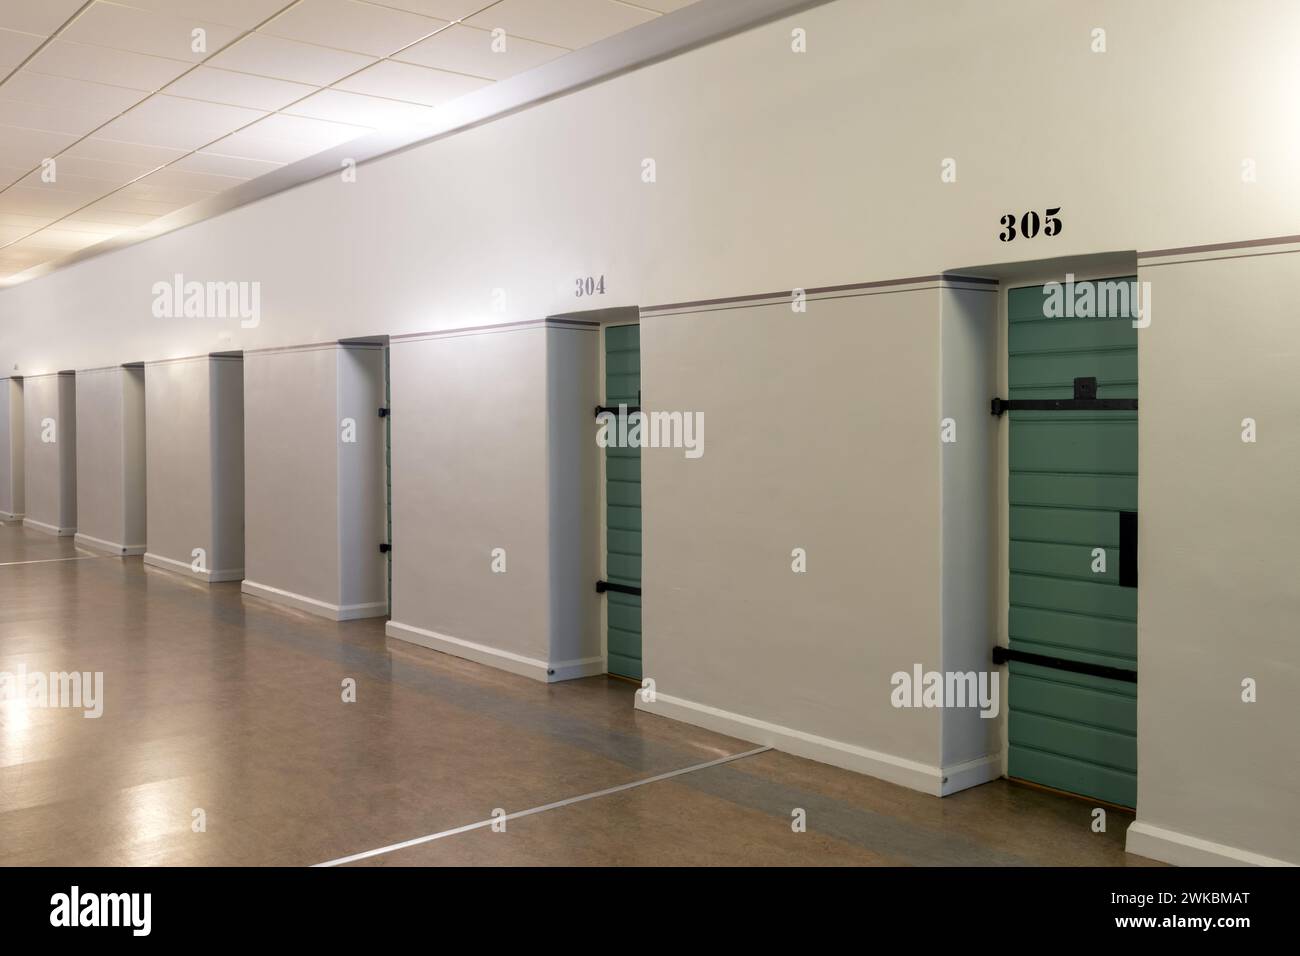 A row of cell doors in a prison corridor Stock Photo